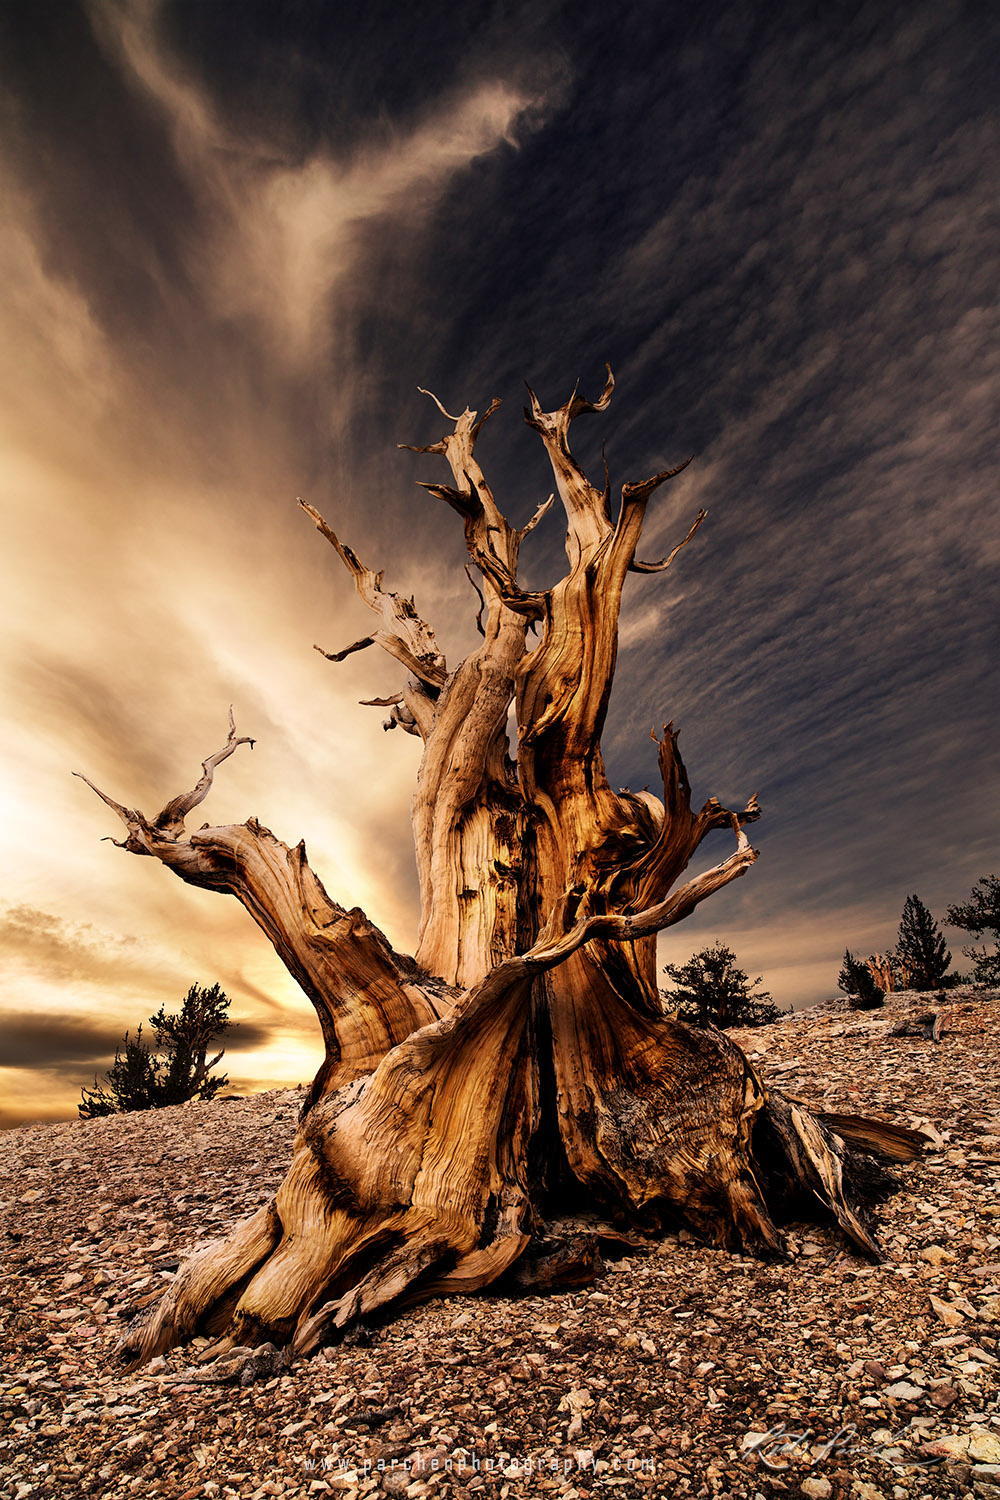 Sunrise over the Ancient Bristlecone Pine Forest